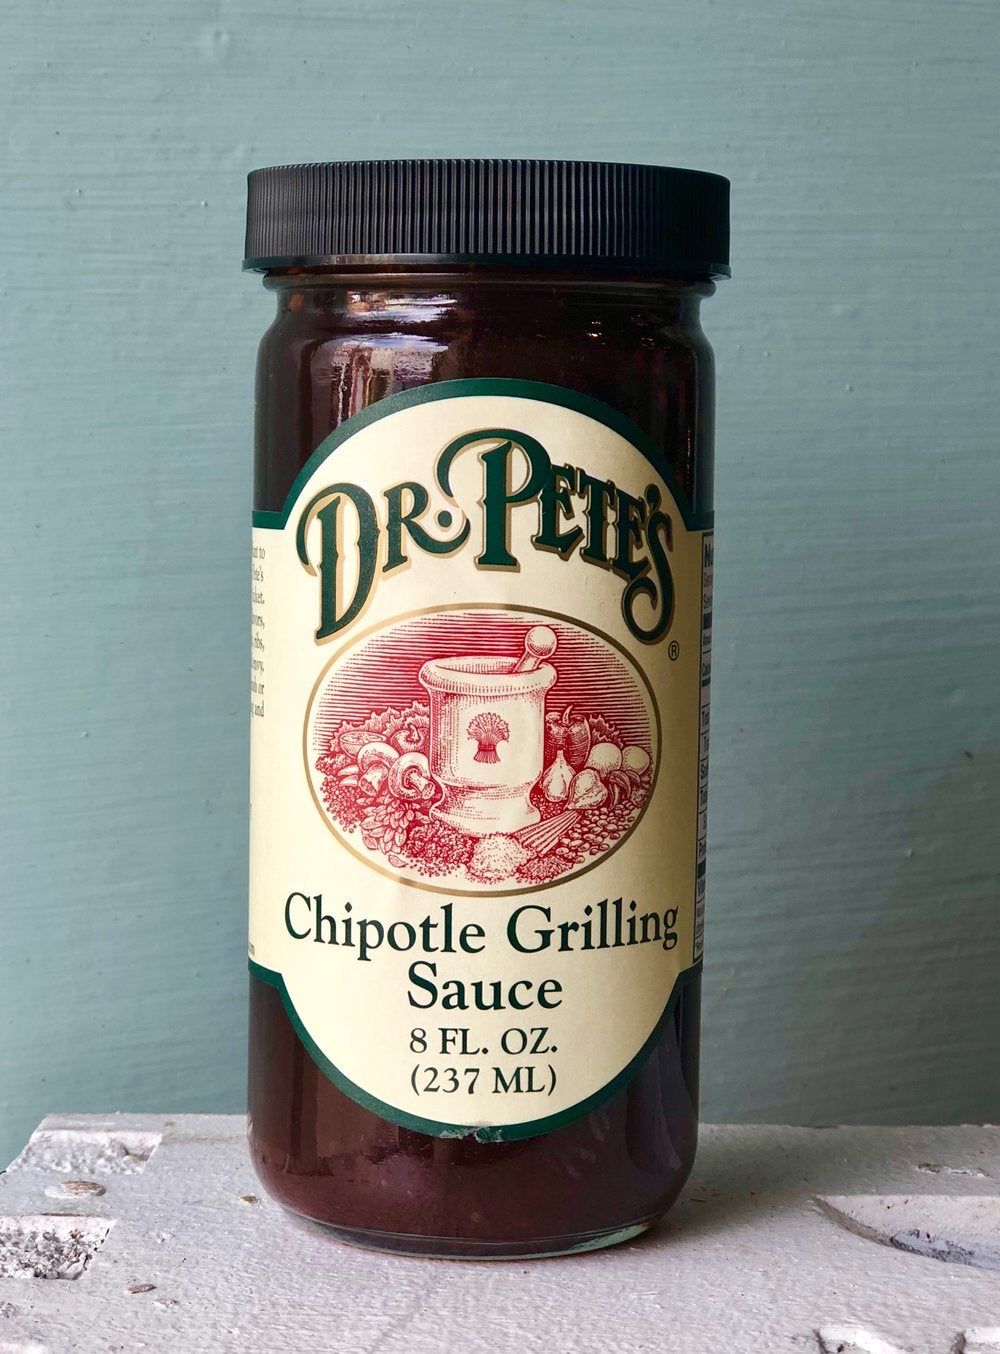 Chipotle Grilling Sauce - Dr. Pete's Foods